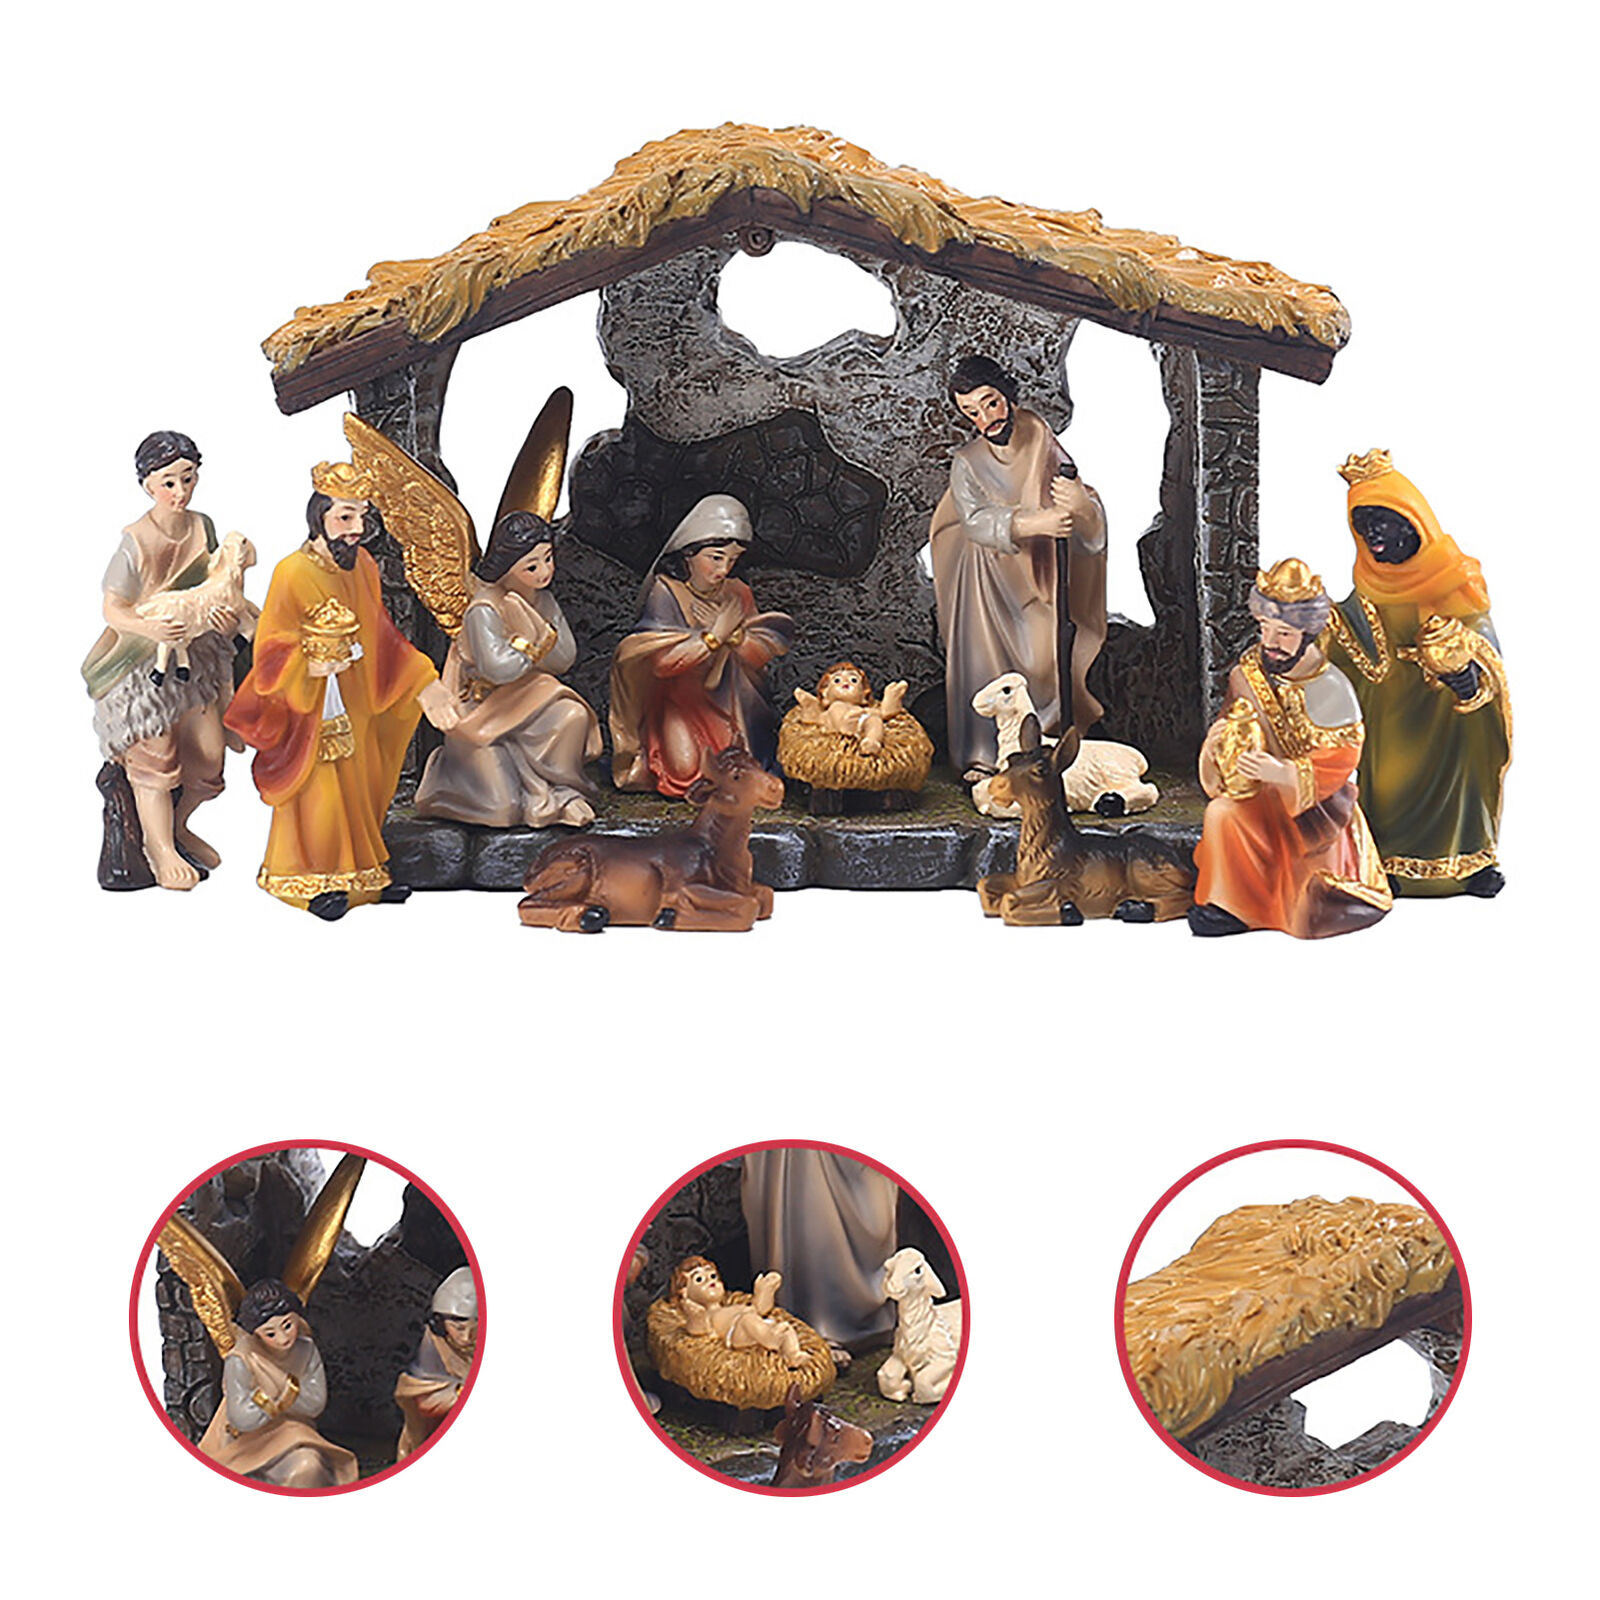 Mini Resin Christmas Nativity Set, 9 Piece Set includes Manger and 8 Figurines